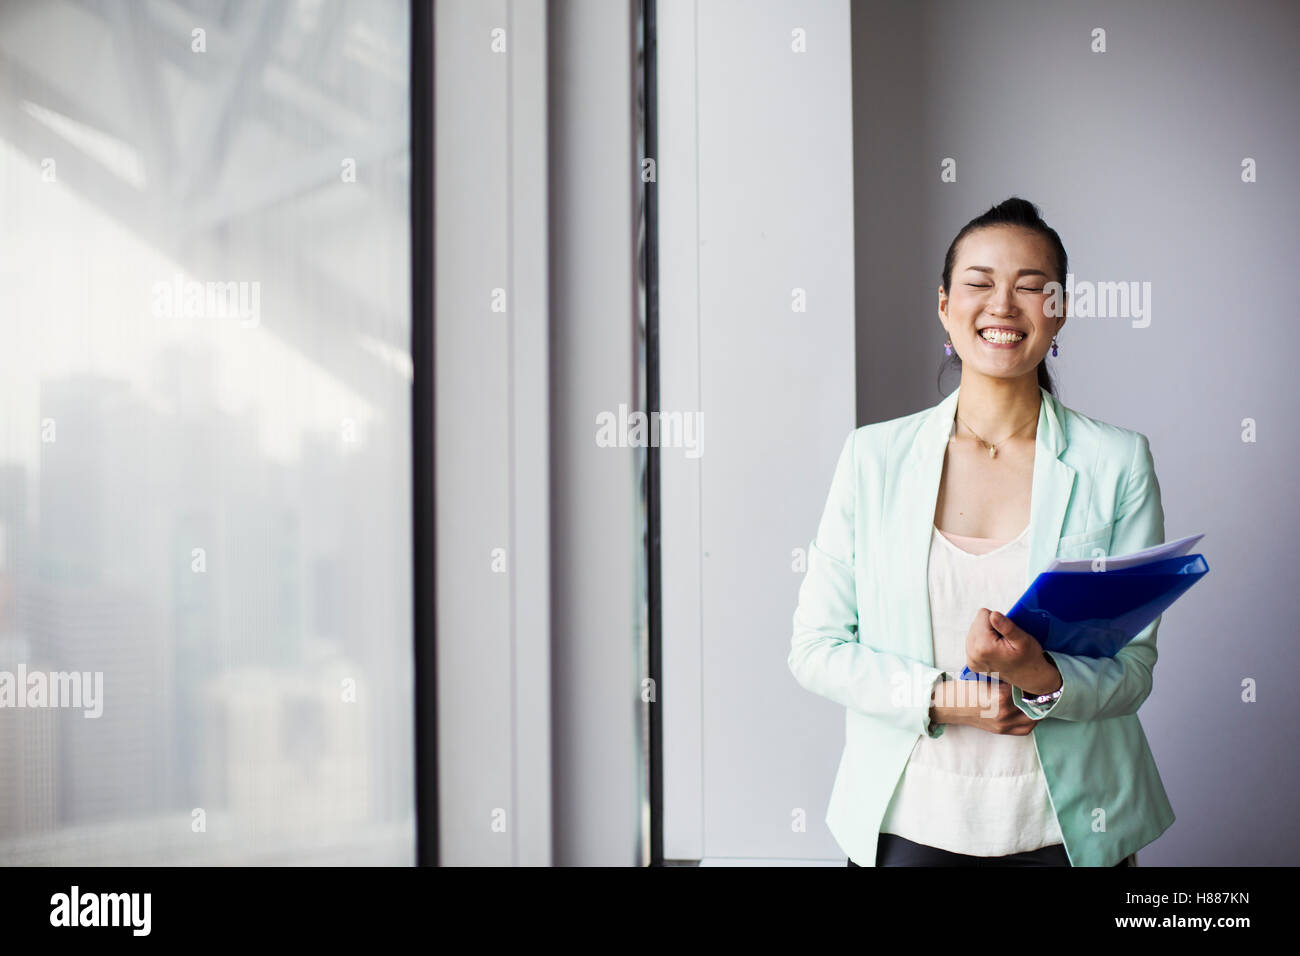 A business woman in the office holding a folder and smiling. Stock Photo